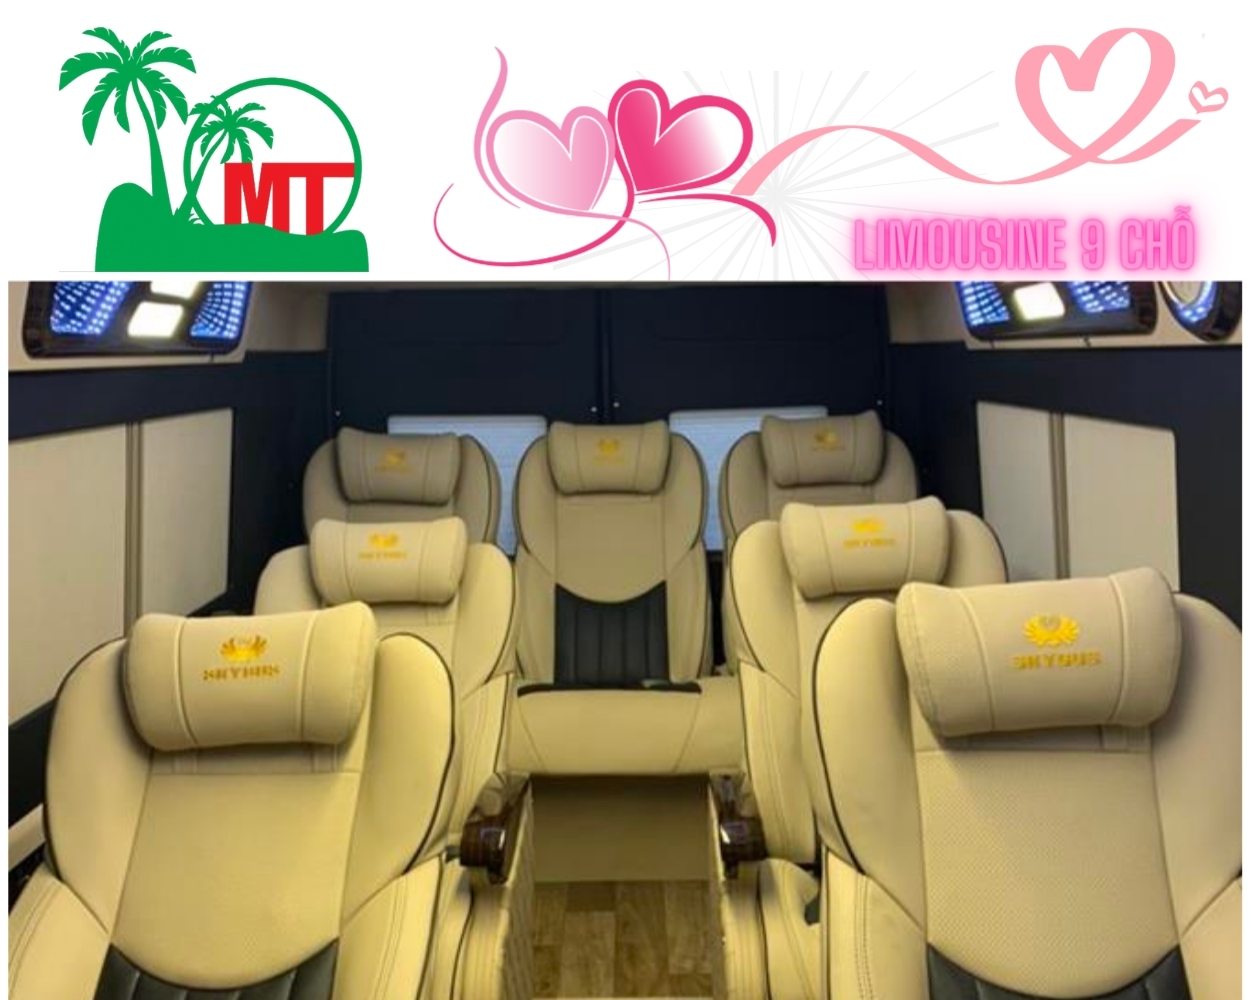 Rent a 9-seat Limousine Ford/ Hyundai Dcar/ Skybus/ Kingkom - Contract Price for Interprovincial travel